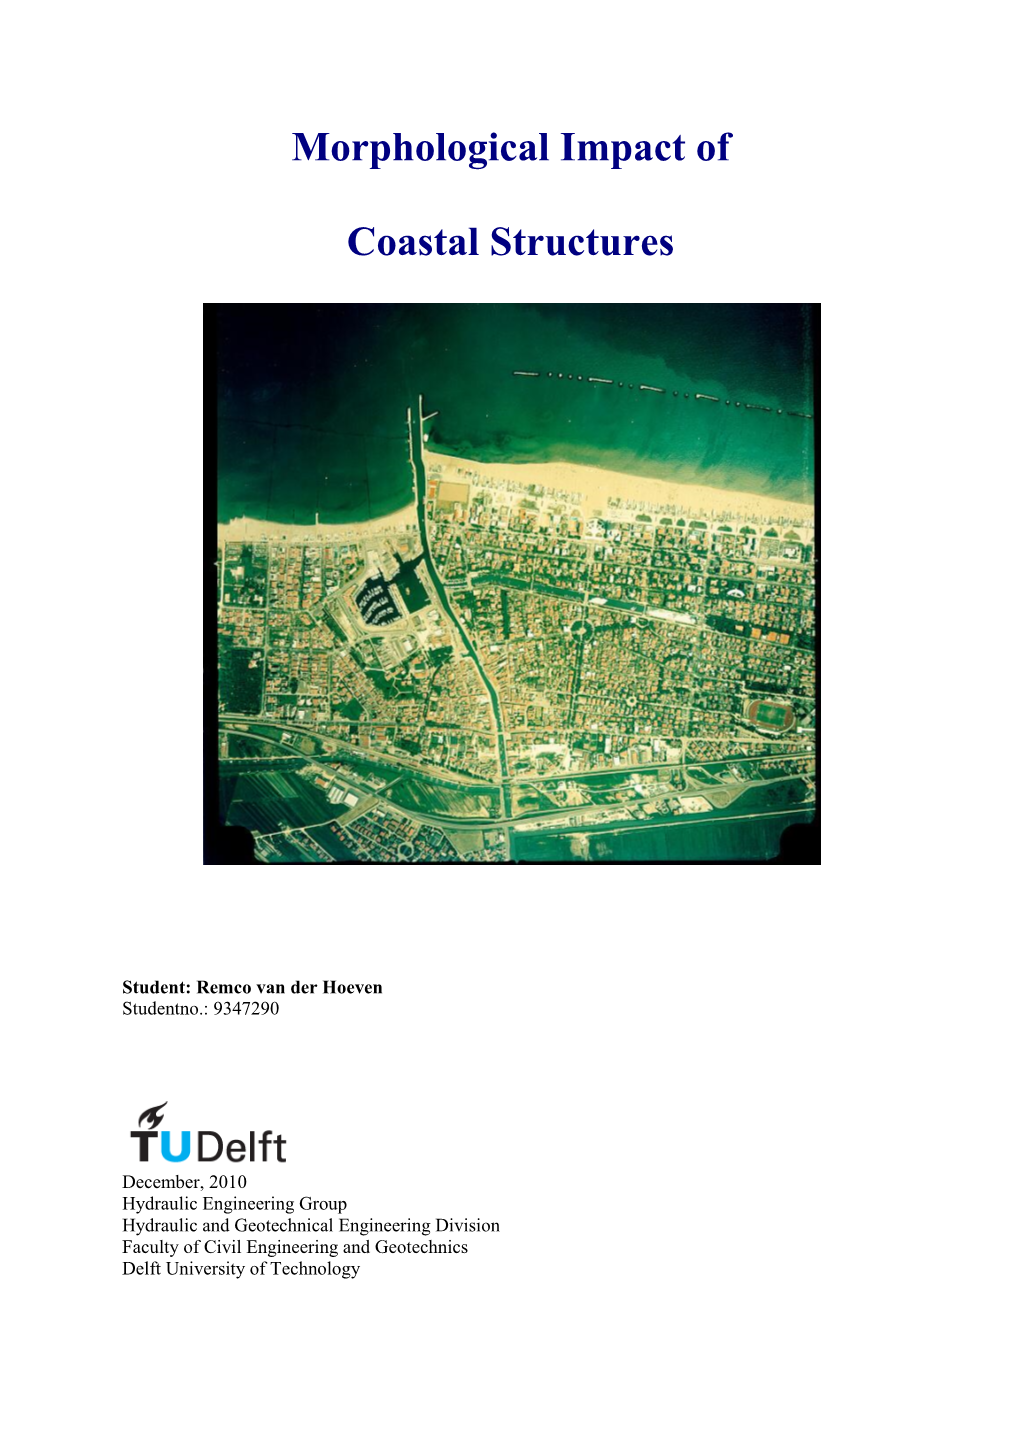 Far Field Morphological Impact of Coastal Structures